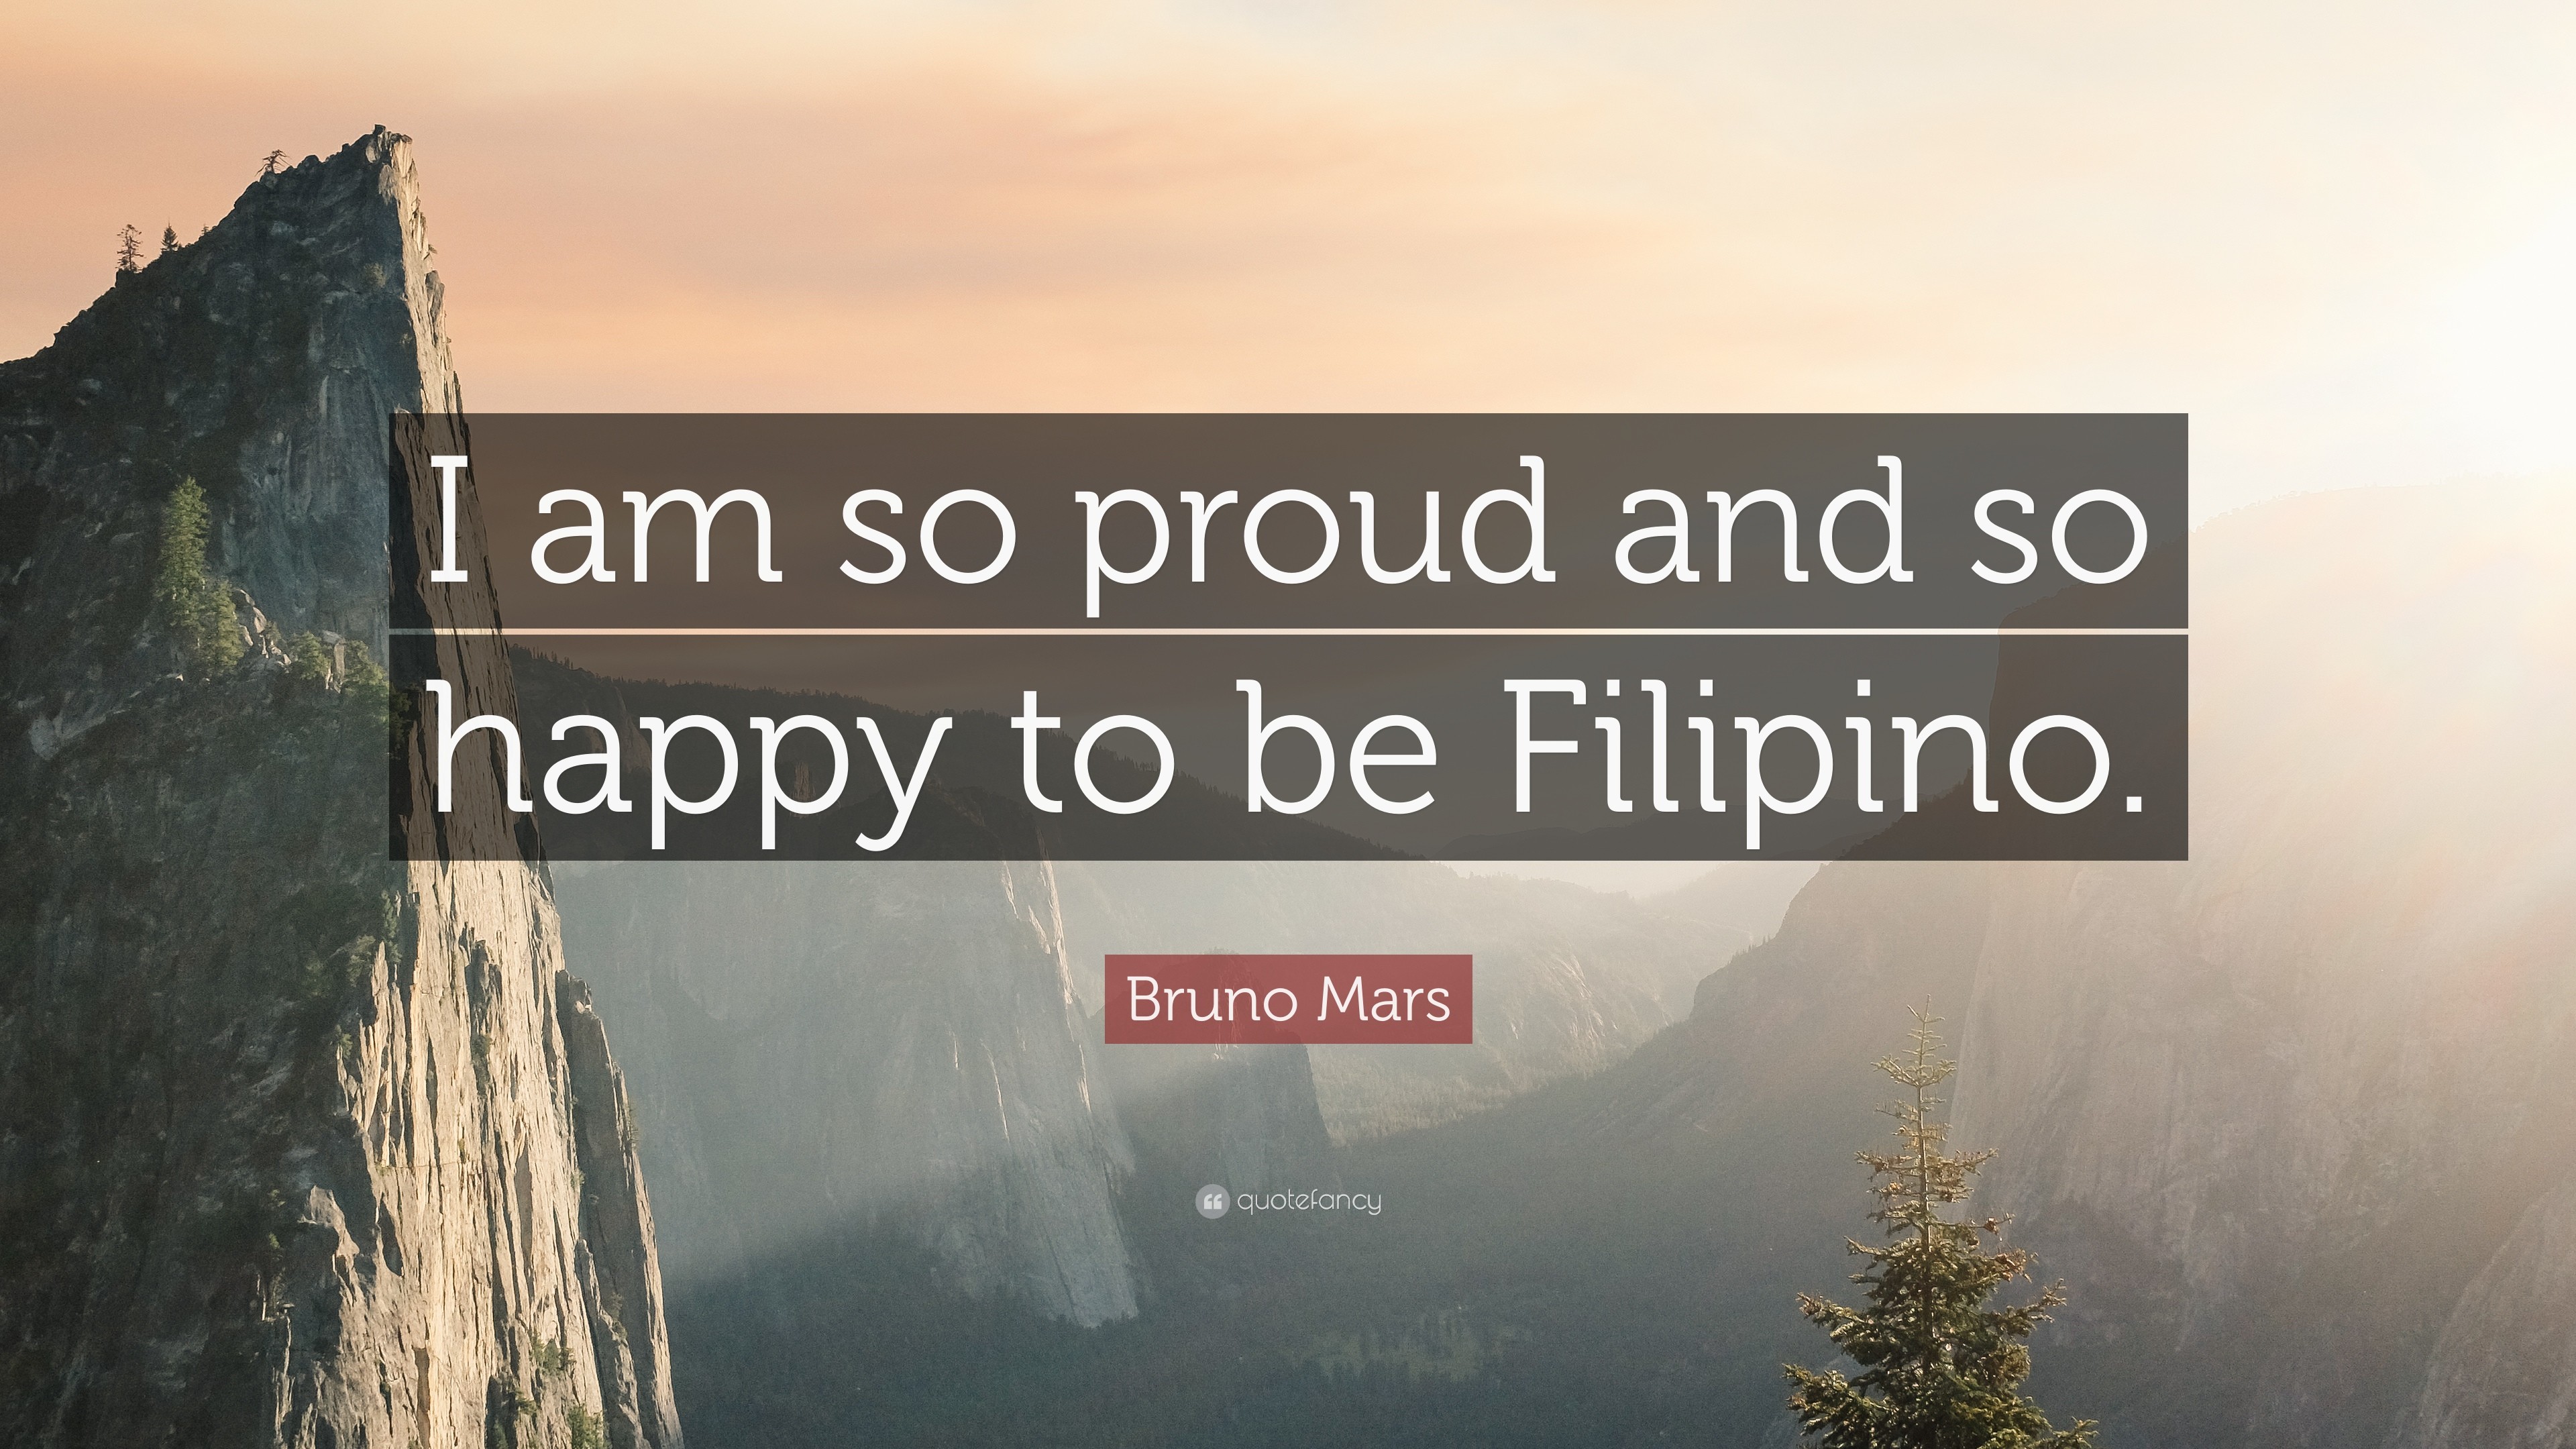 3840x2160 Bruno Mars Quote: “I am so proud and so happy to be Filipino.